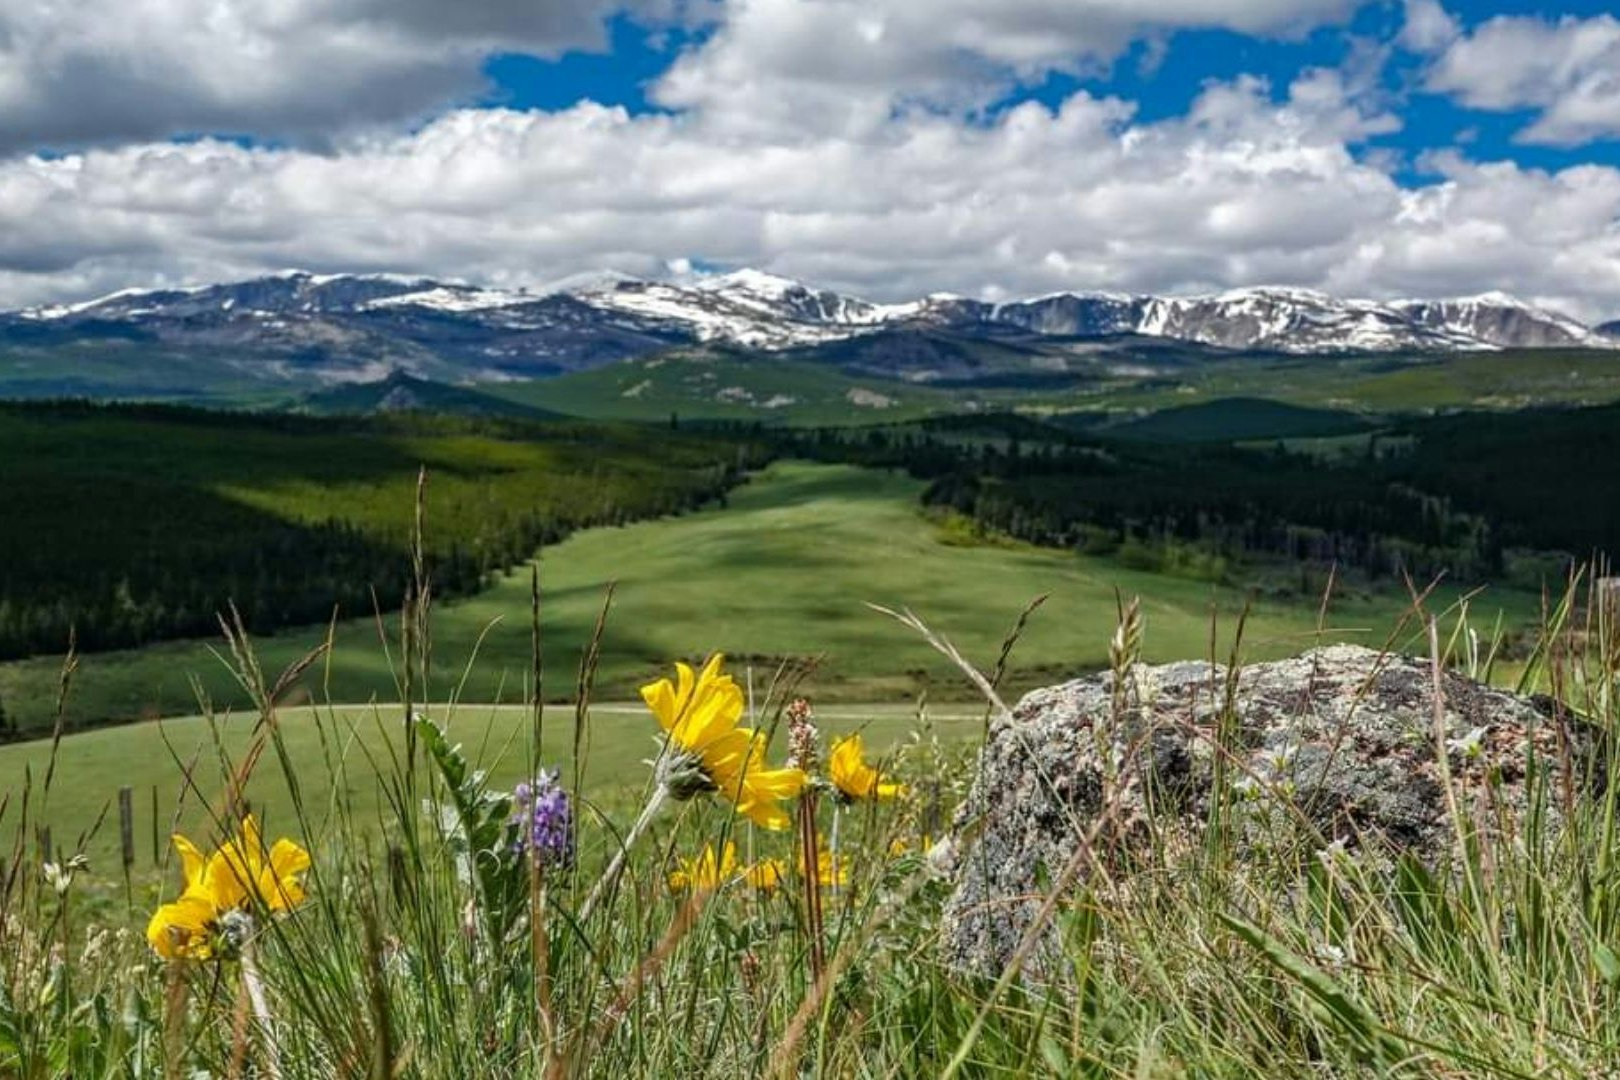 This spring has brought plenty of color, and lots of green, to Wyoming's Bighorn Mountains.